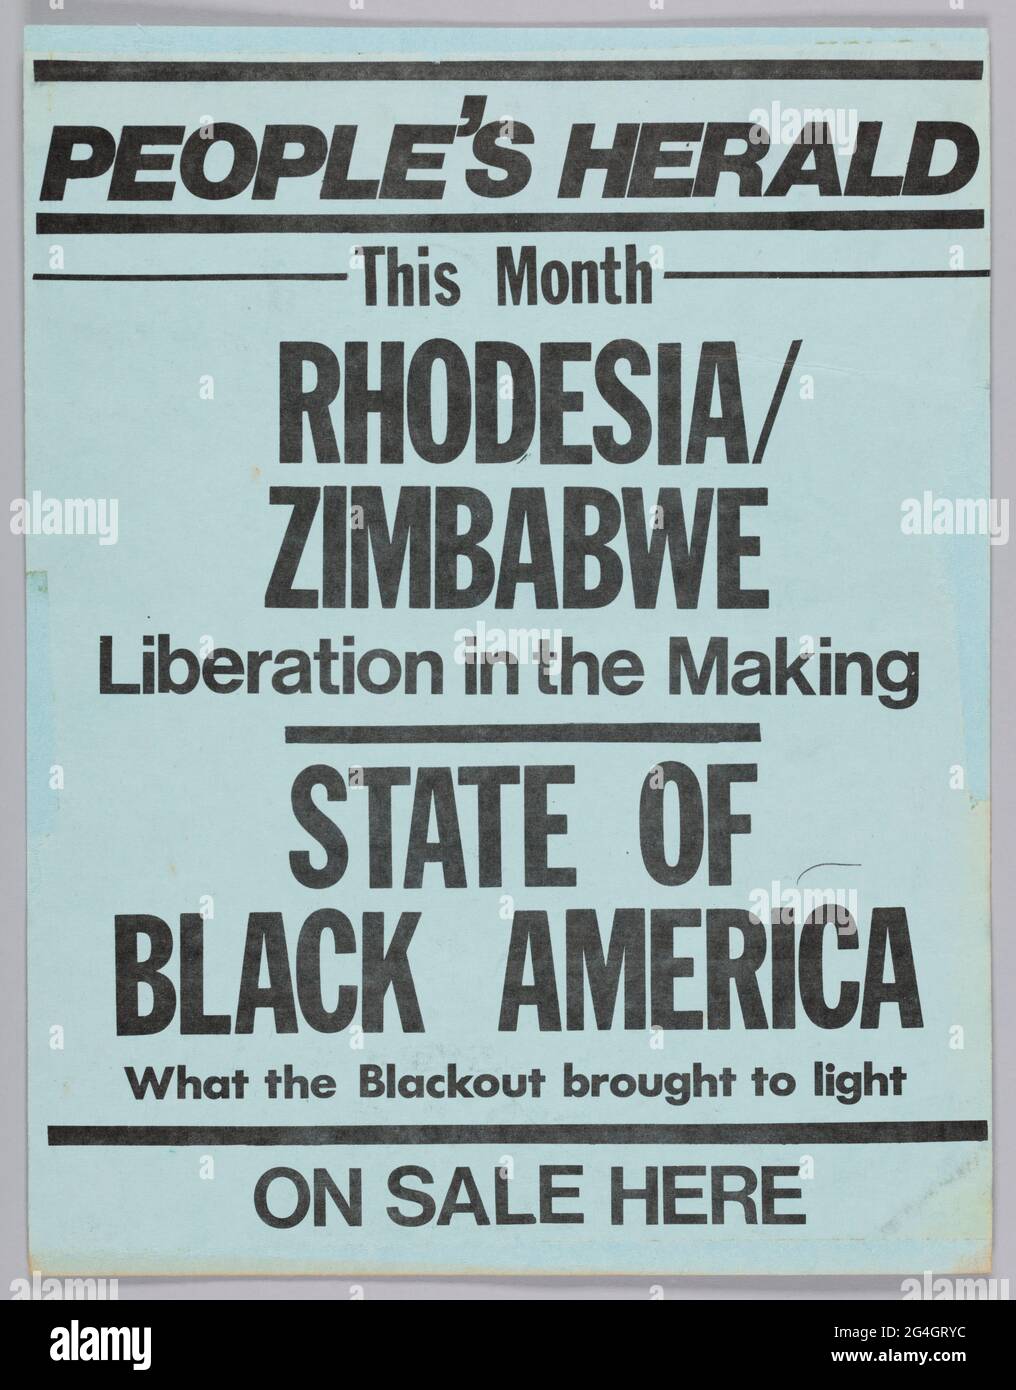 This flyer advertises the September 1977 issue of the People's Herald. The flyer is blue with black text that reads: [PEOPLE'S HERALD / This Month / RHODESIA/ / ZIMBABWE / Liberation in the Making / STATE OF BLACK AMERICA / What the Blackout brought to light / ON SALE HERE]. The other side of the flyer reads [LEGALIZED GAMBLING? / ANDREW / YOUNG: / A Trojan Horse for Africa / This Month in / People's Herald]. Stock Photo